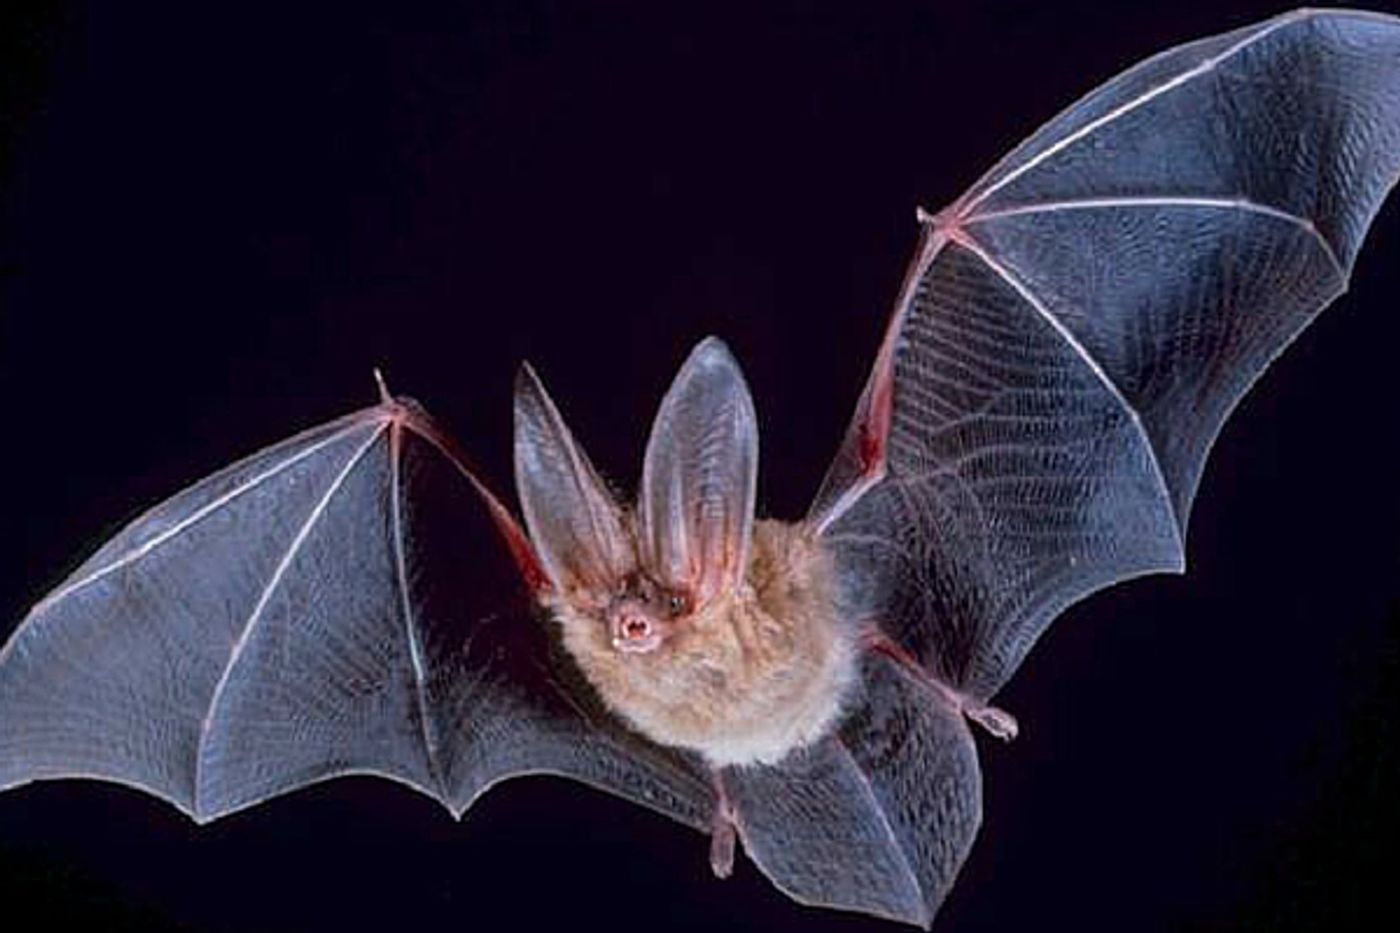 Bats can filter out sounds when navigating